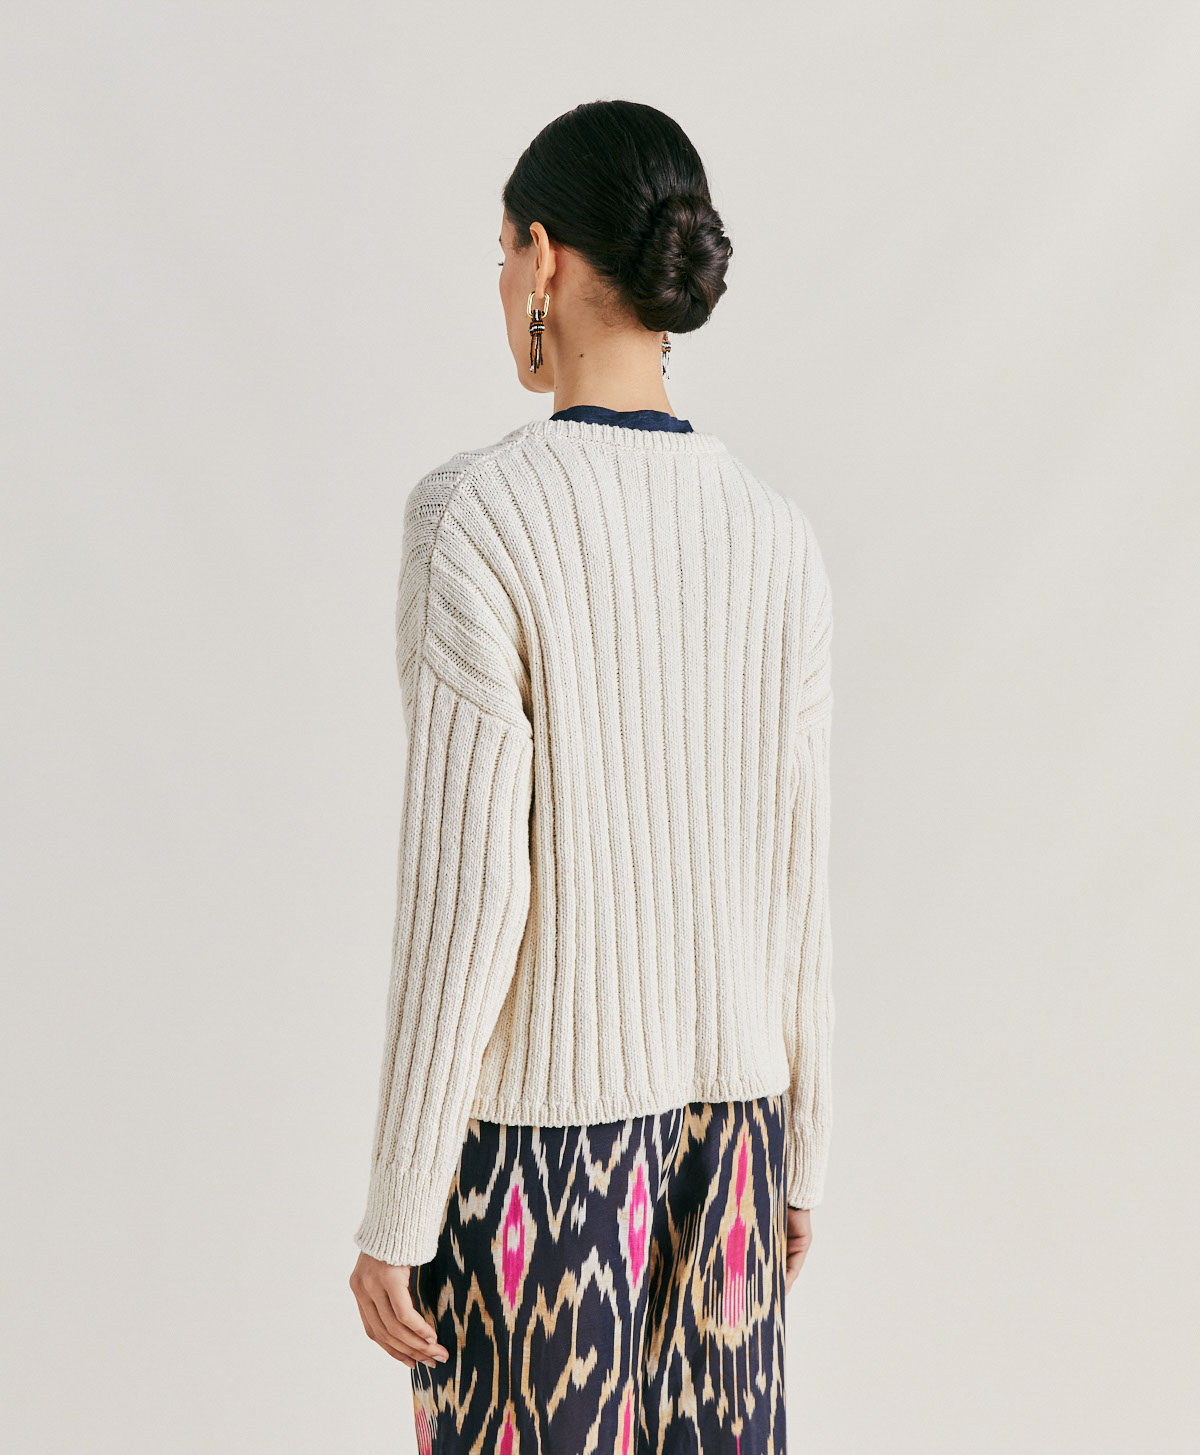 BAUMETTE KNITWEAR WITH MIXED STITCHES - CREAM - Momonì